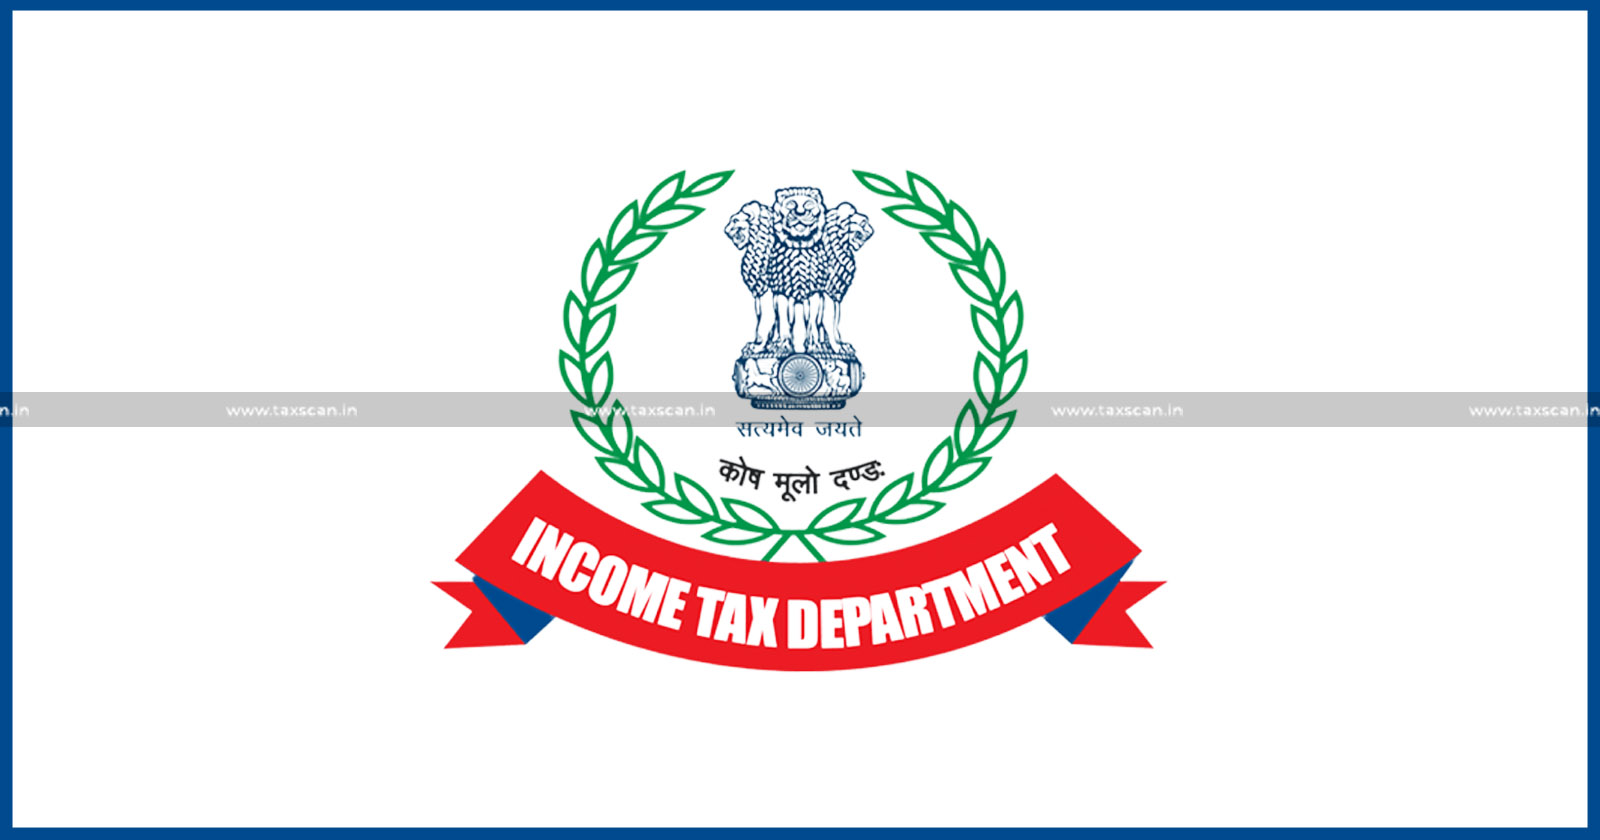 Income Tax Department - e-pay tax services - Karnataka Bank Customers - Karnataka Bank - Income Tax Department enables e-pay tax services - taxscan